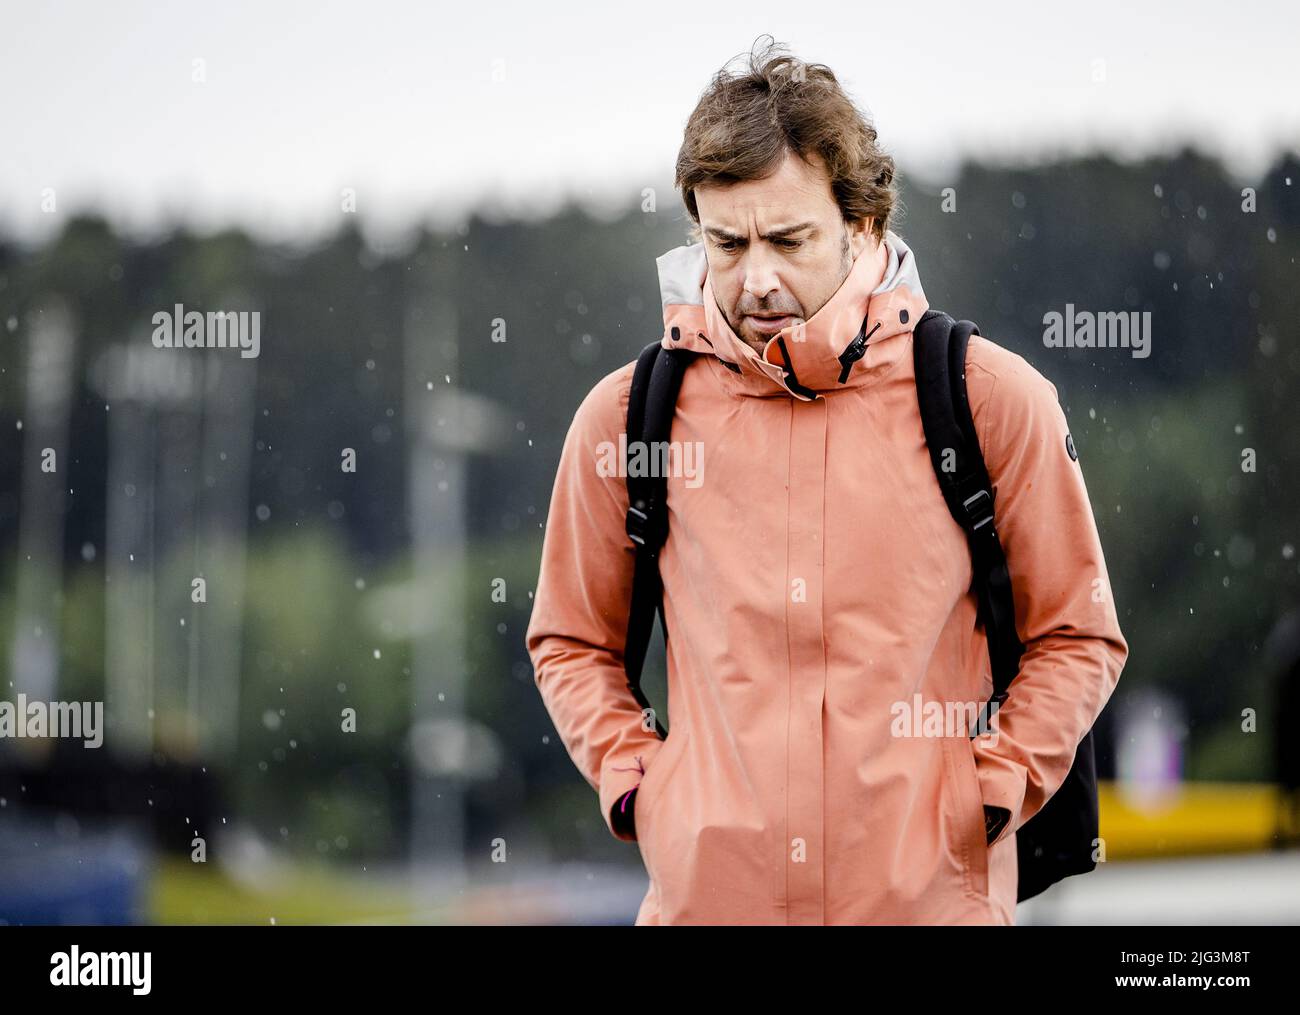 Spielberg, Austria. 7th July, 2022. 2022-07-07 12:48:48 SPIELBERG - Fernando Alonso (Alpine) arrives at the Red Bull Ring race track ahead of the Austrian Grand Prix. ANP SEM VAN DER WAL netherlands out - belgium out Credit: ANP/Alamy Live News Stock Photo